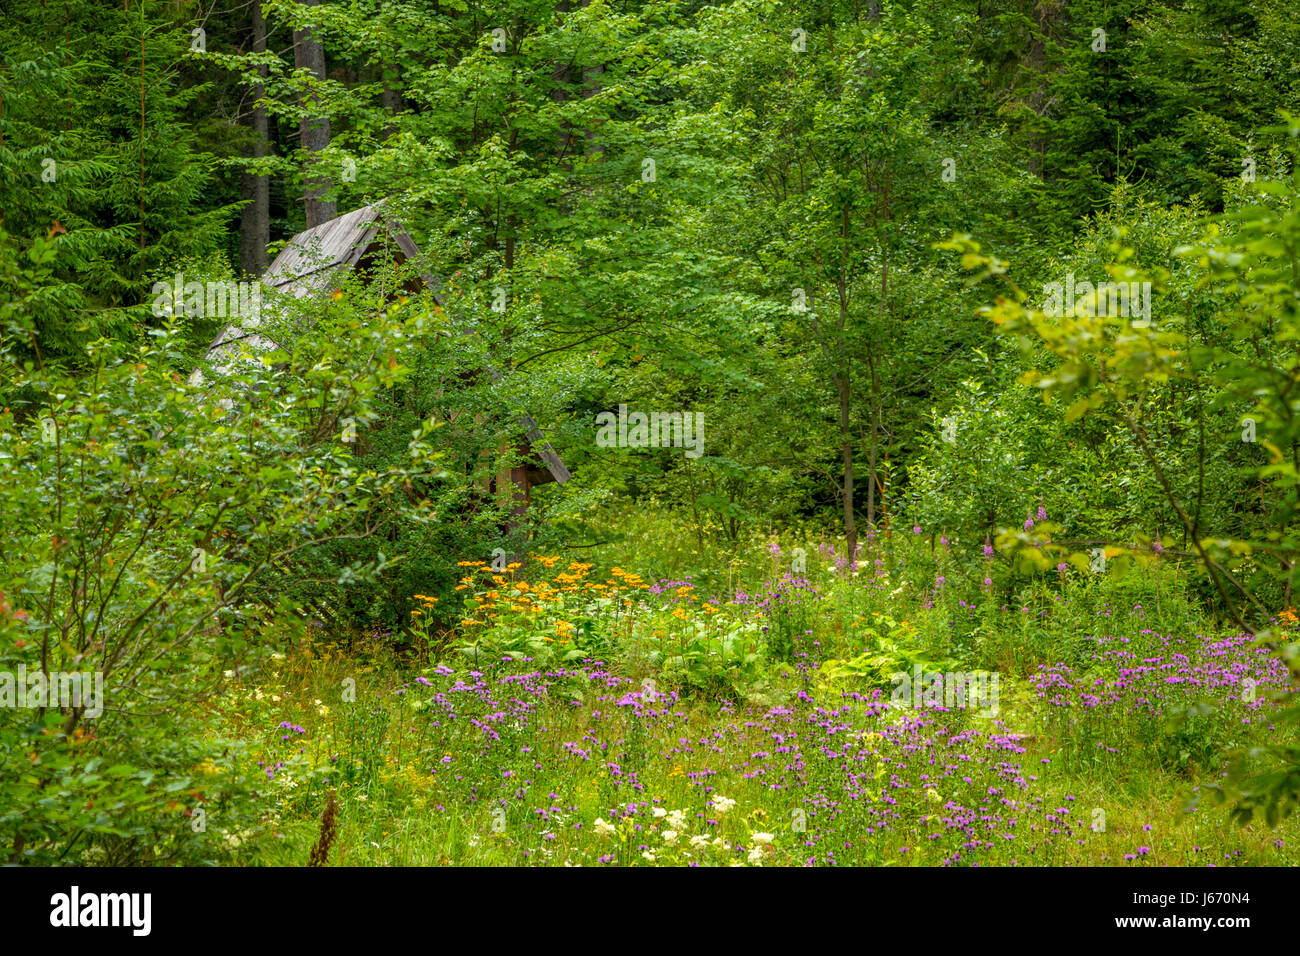 A dense summer forest. A small clearing with grass and flowers. An abandoned house is hidden behind tree branches Stock Photo